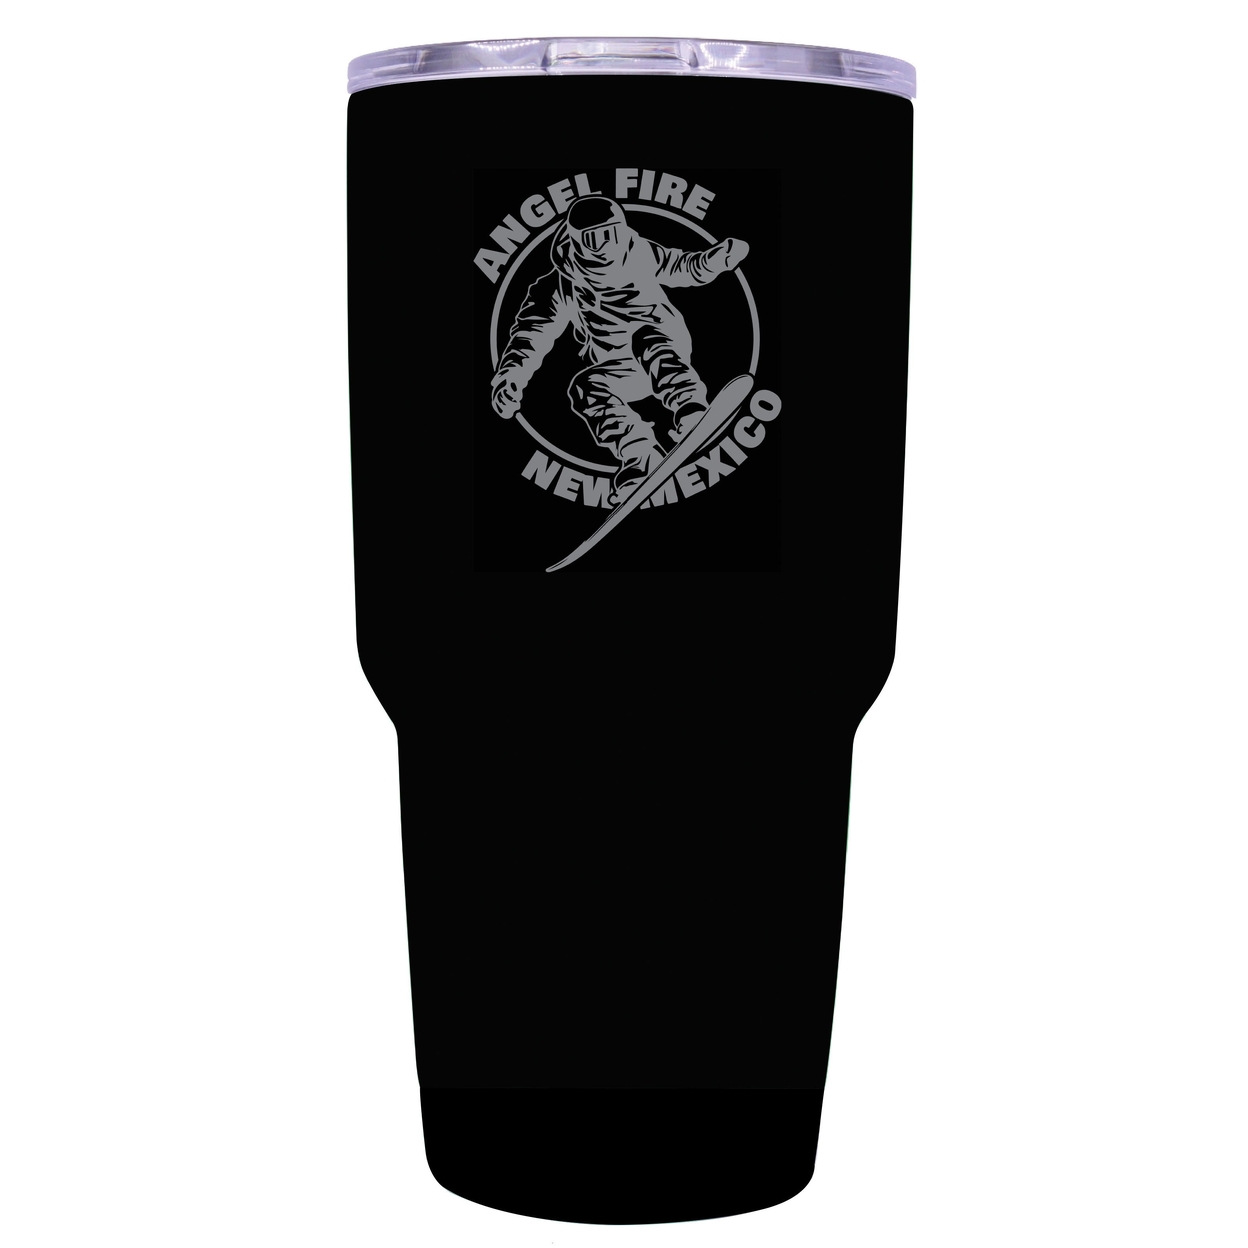 Angel Fire New Mexico Souvenir 24 Oz Engraved Insulated Stainless Steel Tumbler - Black,,Single Unit